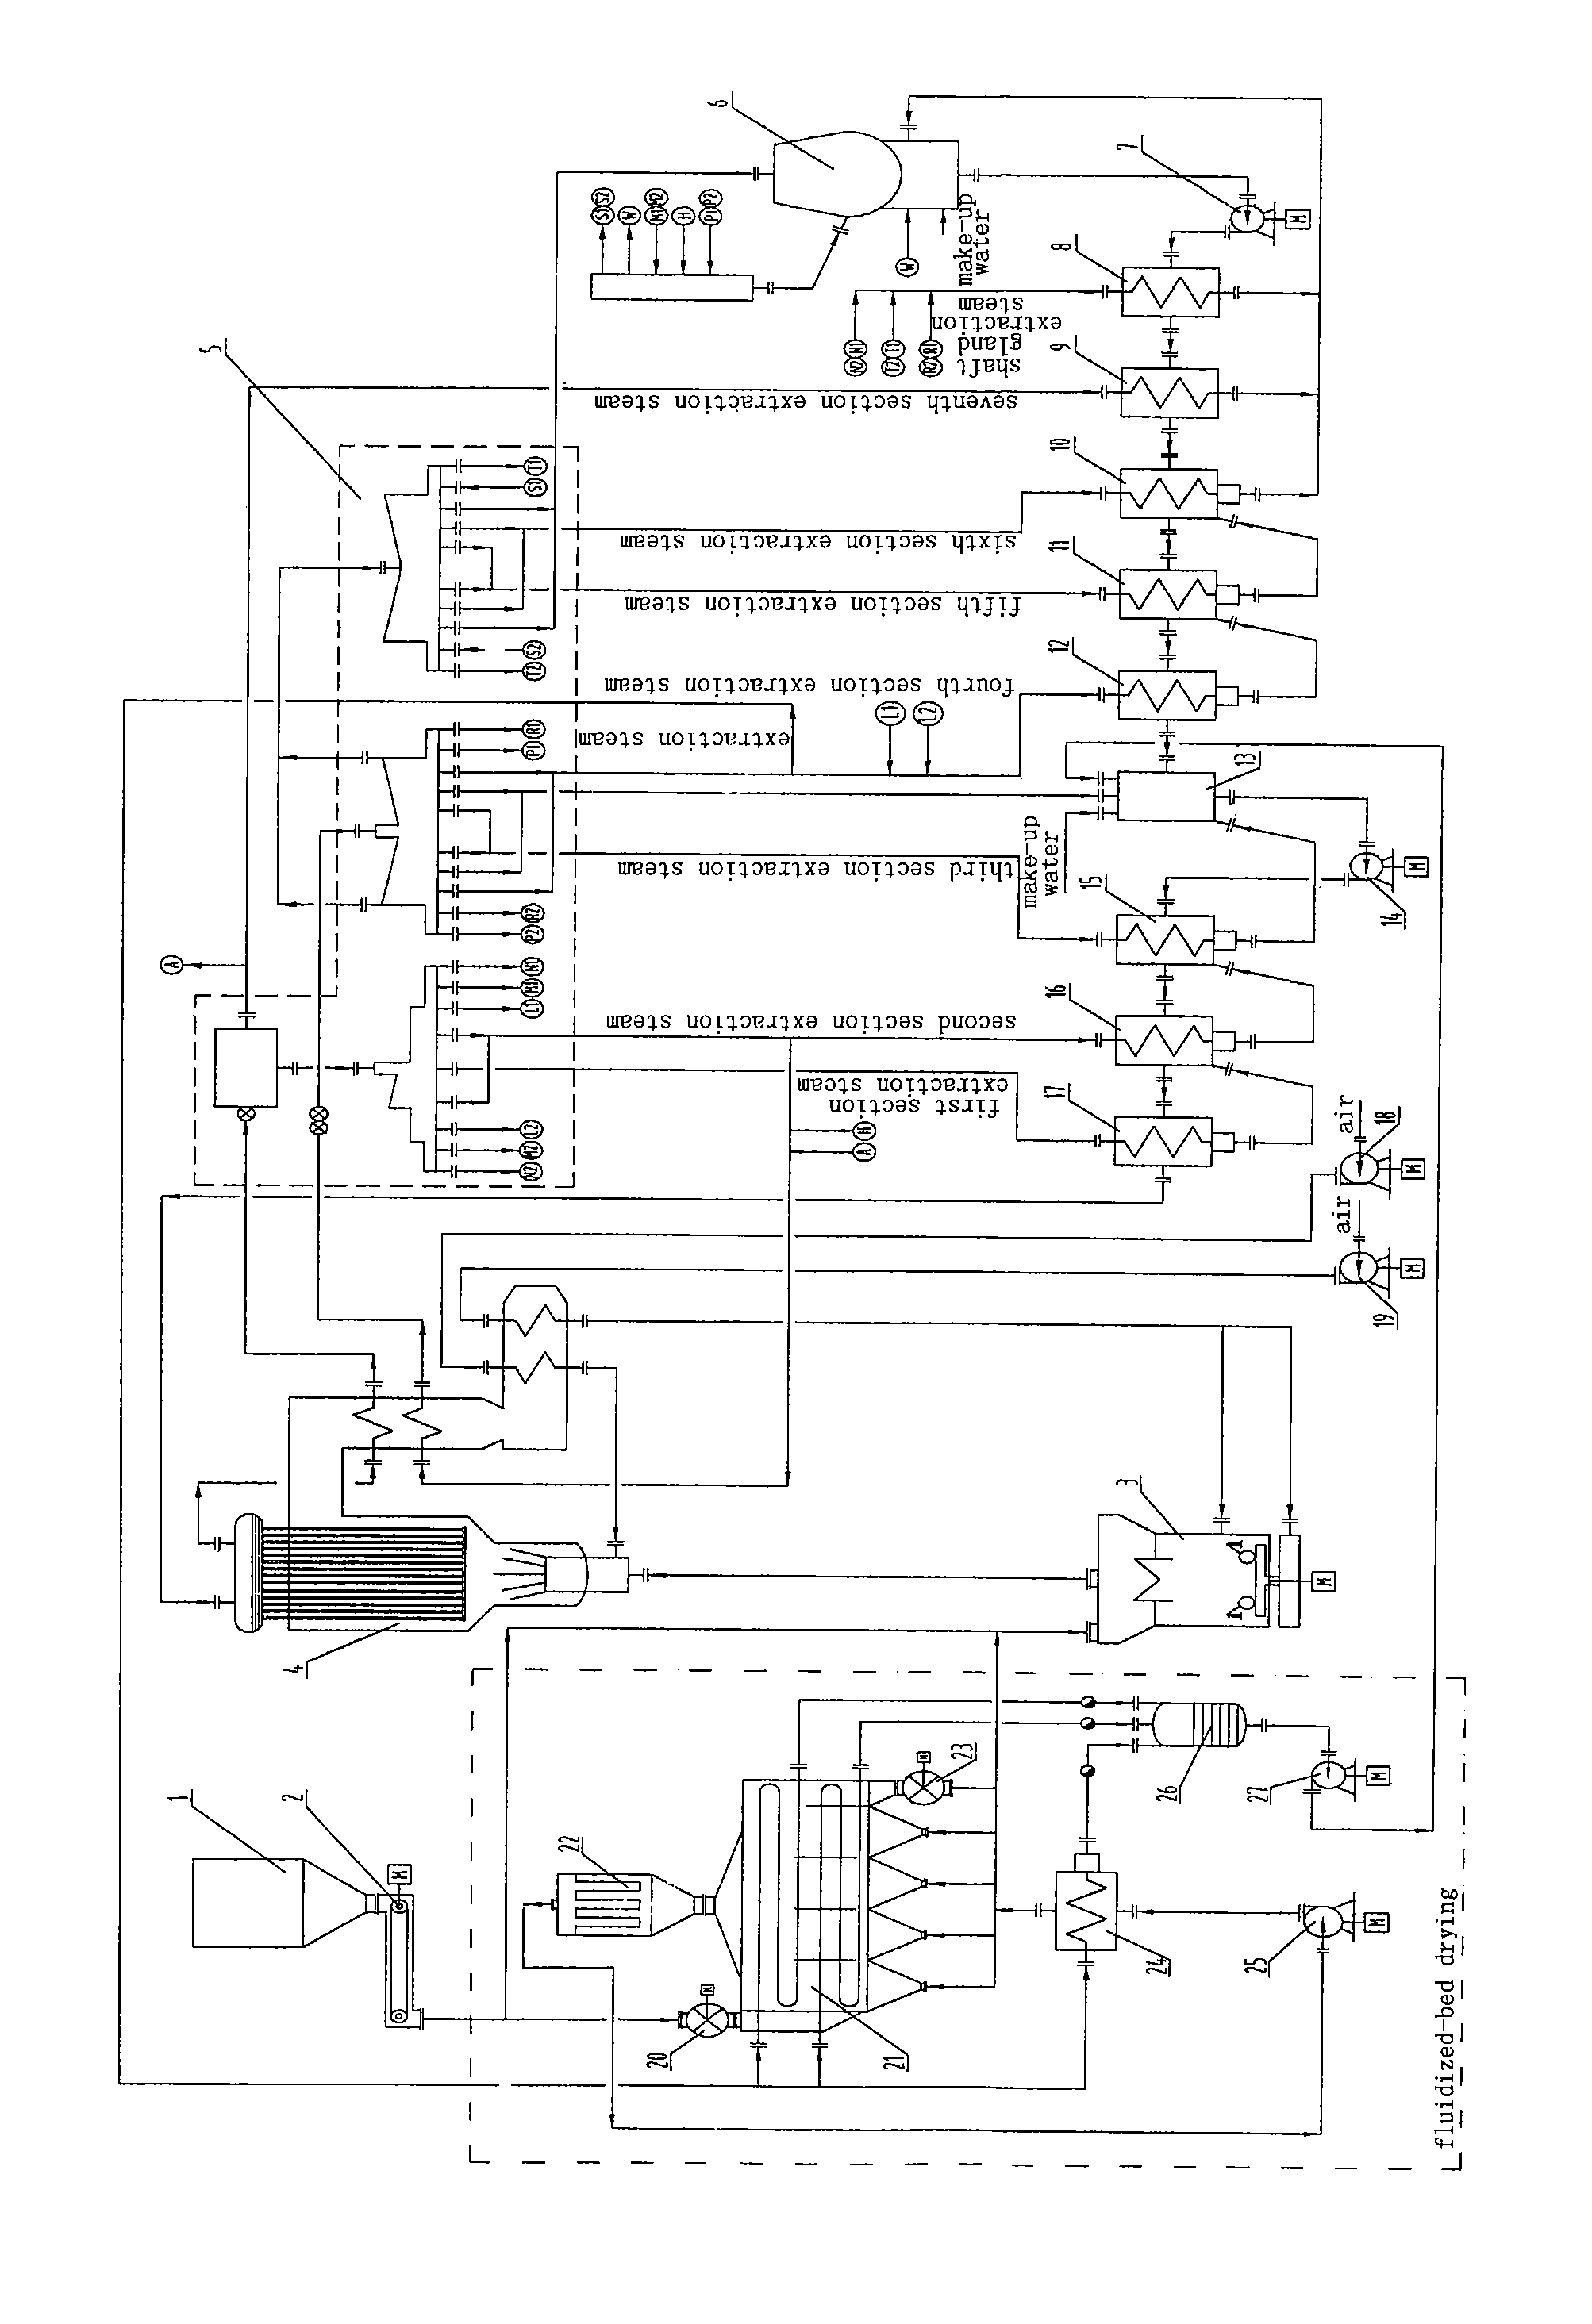 Process for reducing coal consumption in coal fired power plant with fluidized-bed drying